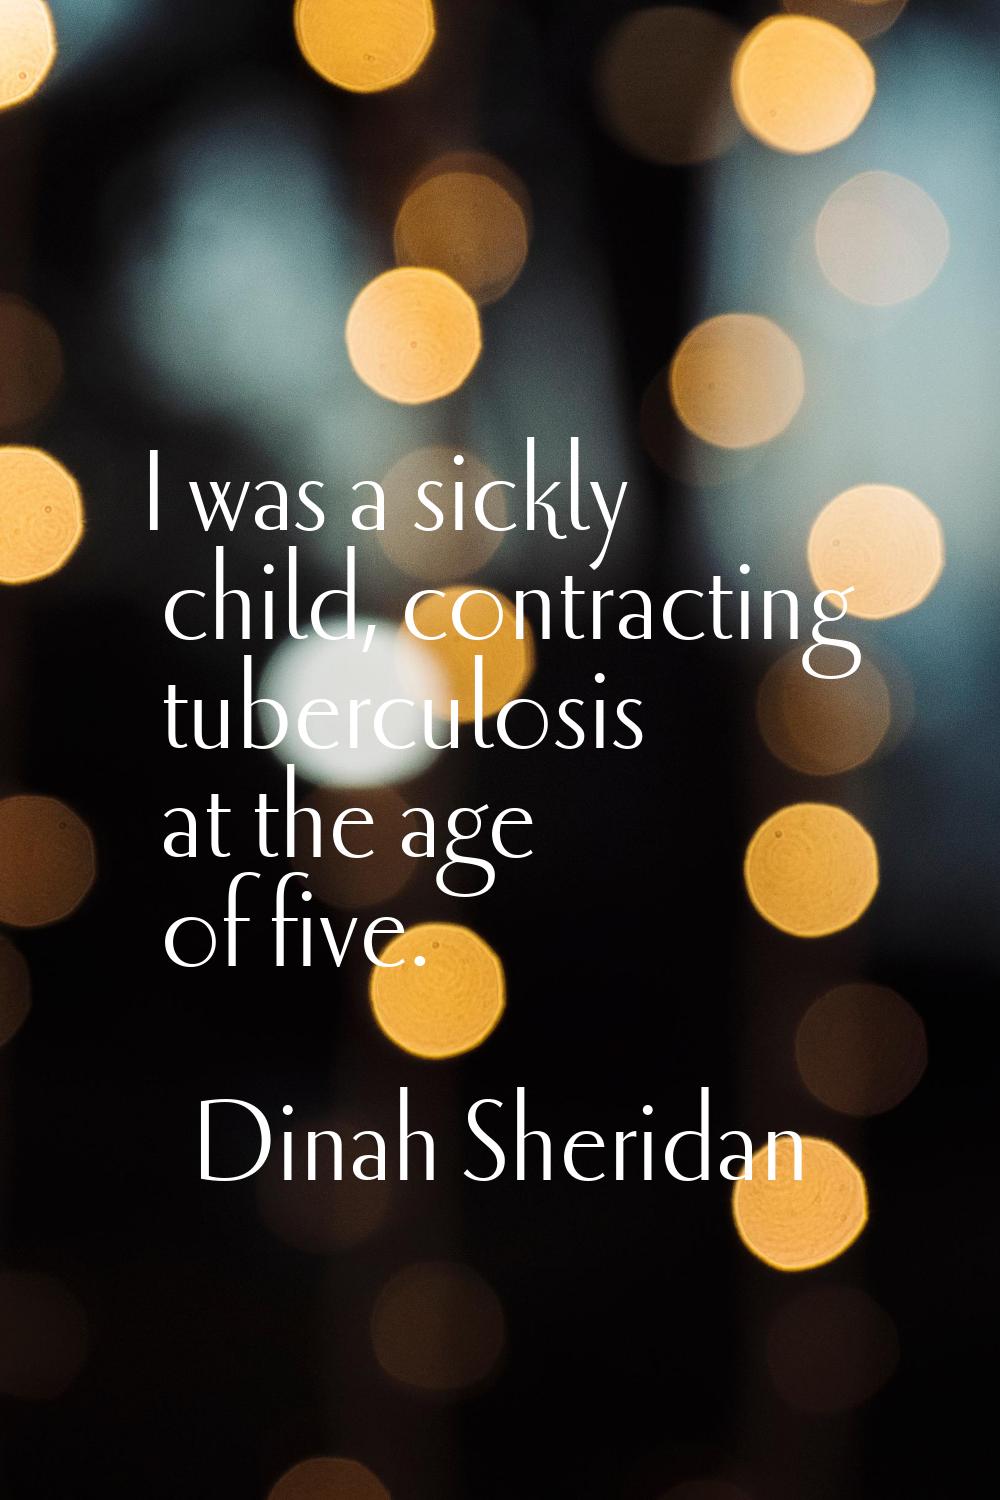 I was a sickly child, contracting tuberculosis at the age of five.